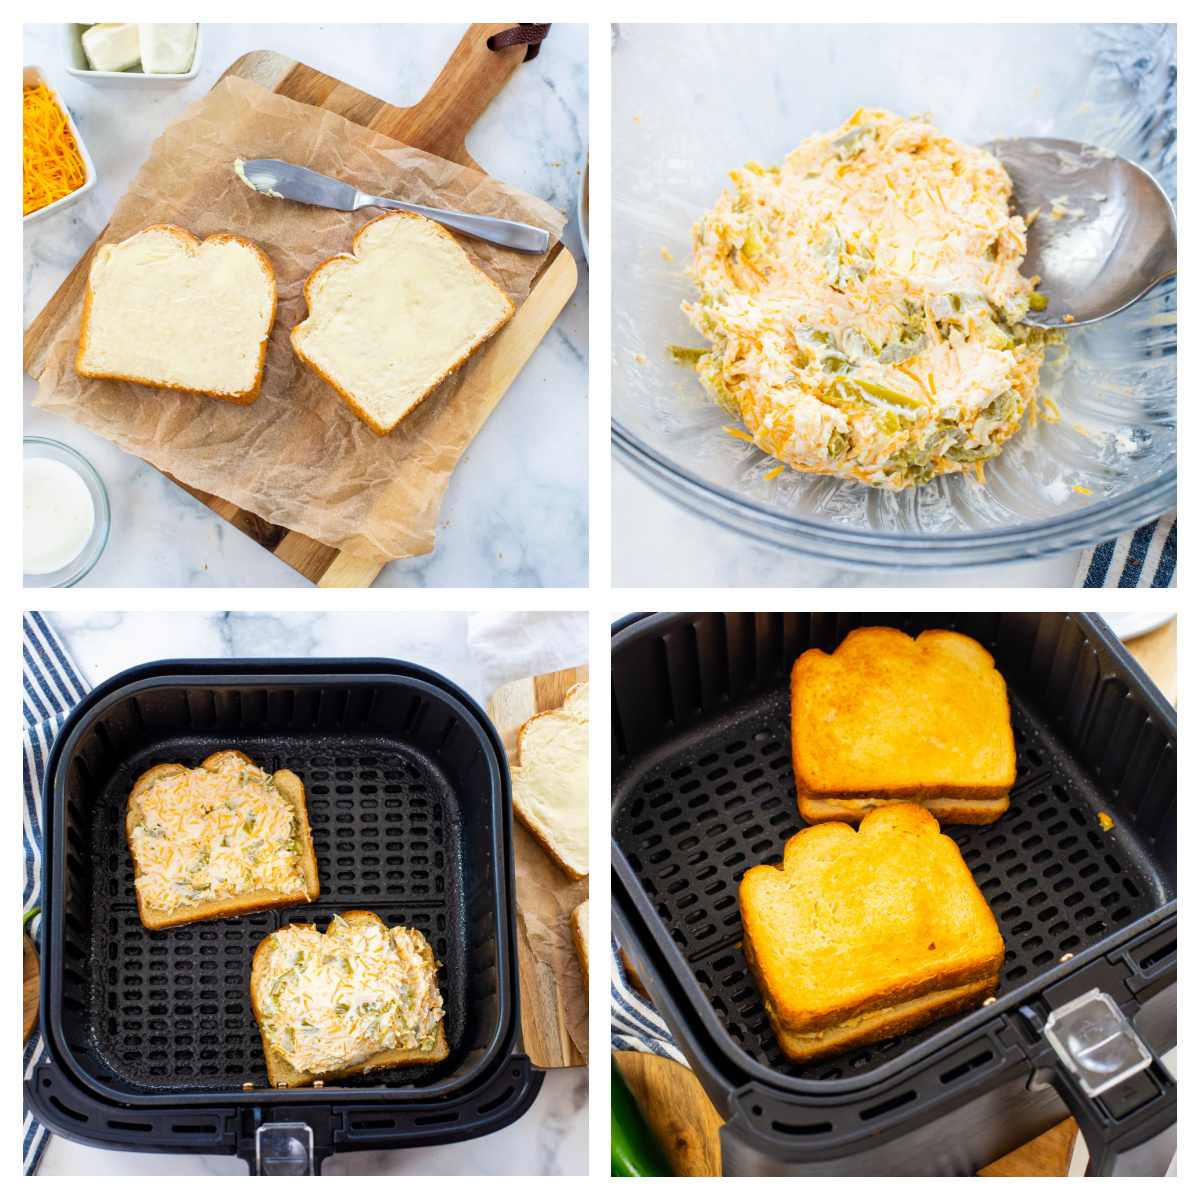 Collage of the steps of cooking a jalapeno grilled cheese.